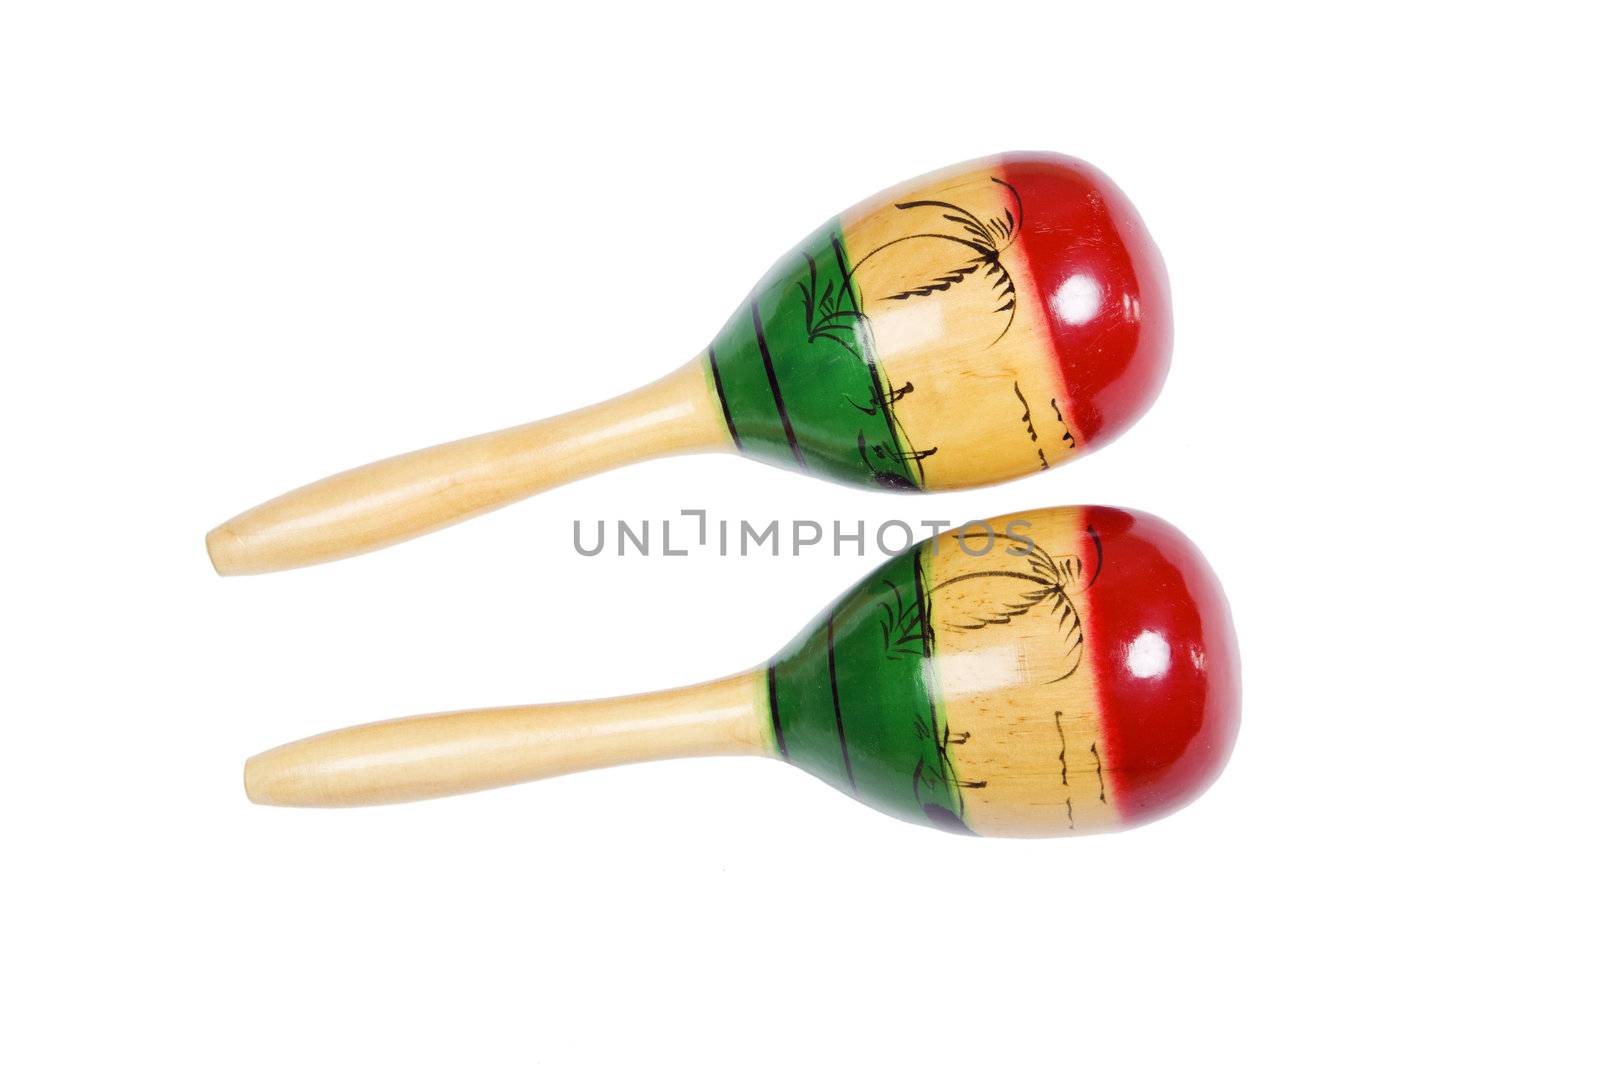 Two colorful shakers or maracas isolated with clipping path by Jaykayl